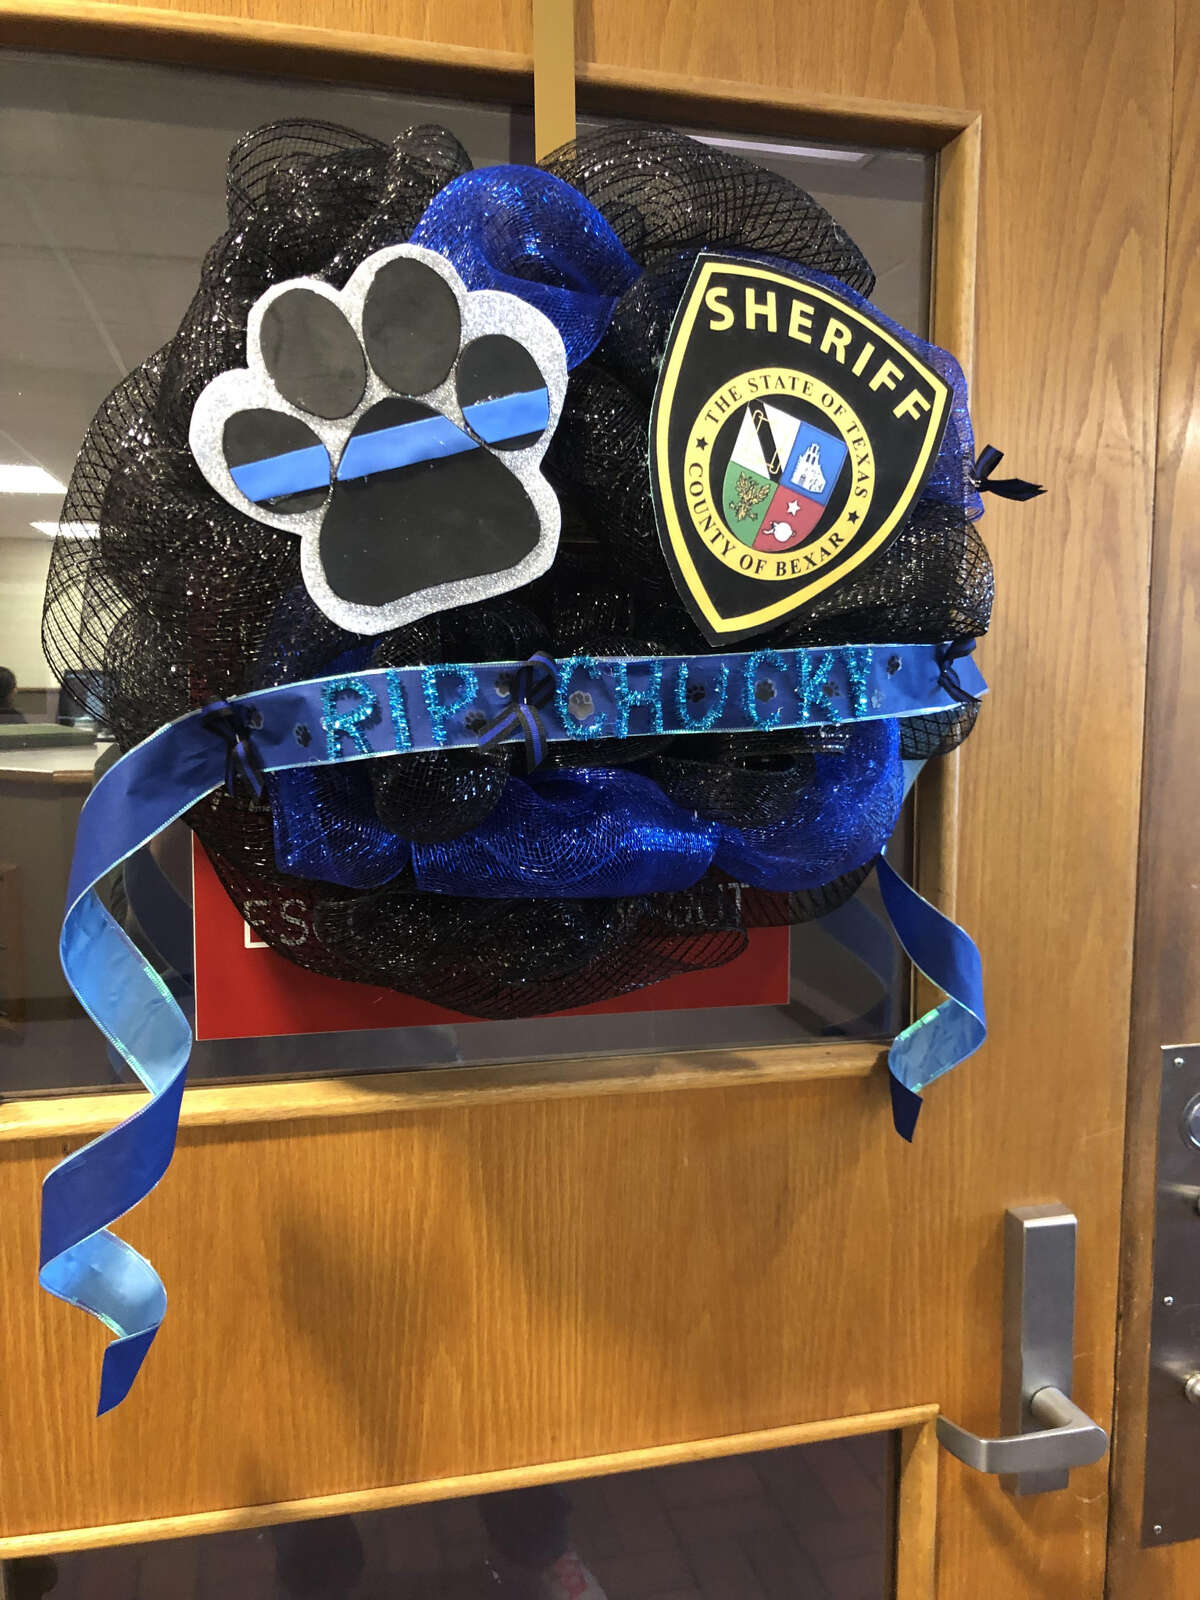 A memorial wreath for Bexar County K9 Chucky hangs at the Bexar County Sheriff's Office on Monday, Jan. 28, 2019.